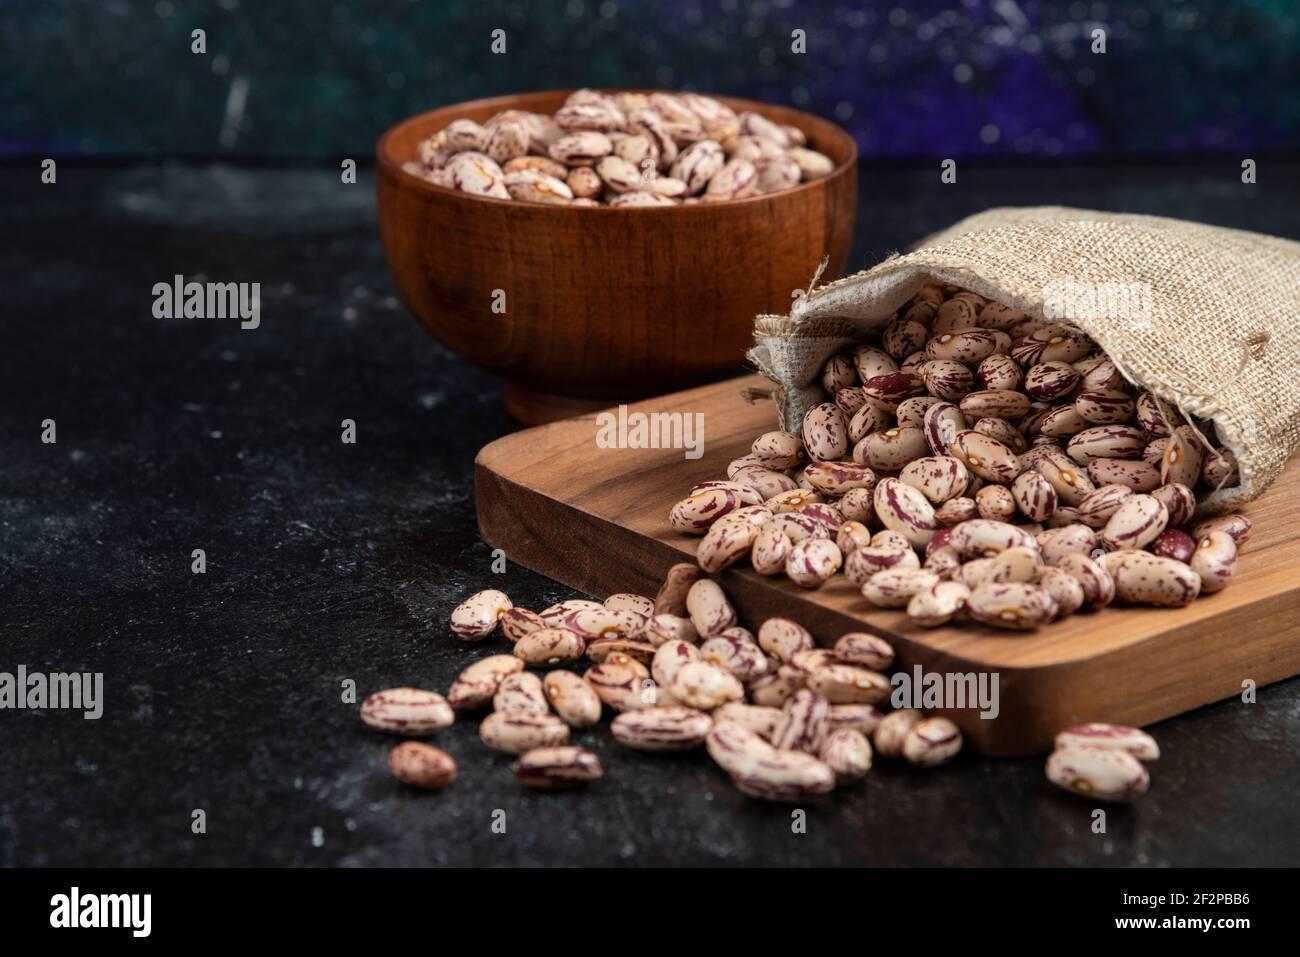 Sackcloth of dried raw beans placed on dark background Stock Photo